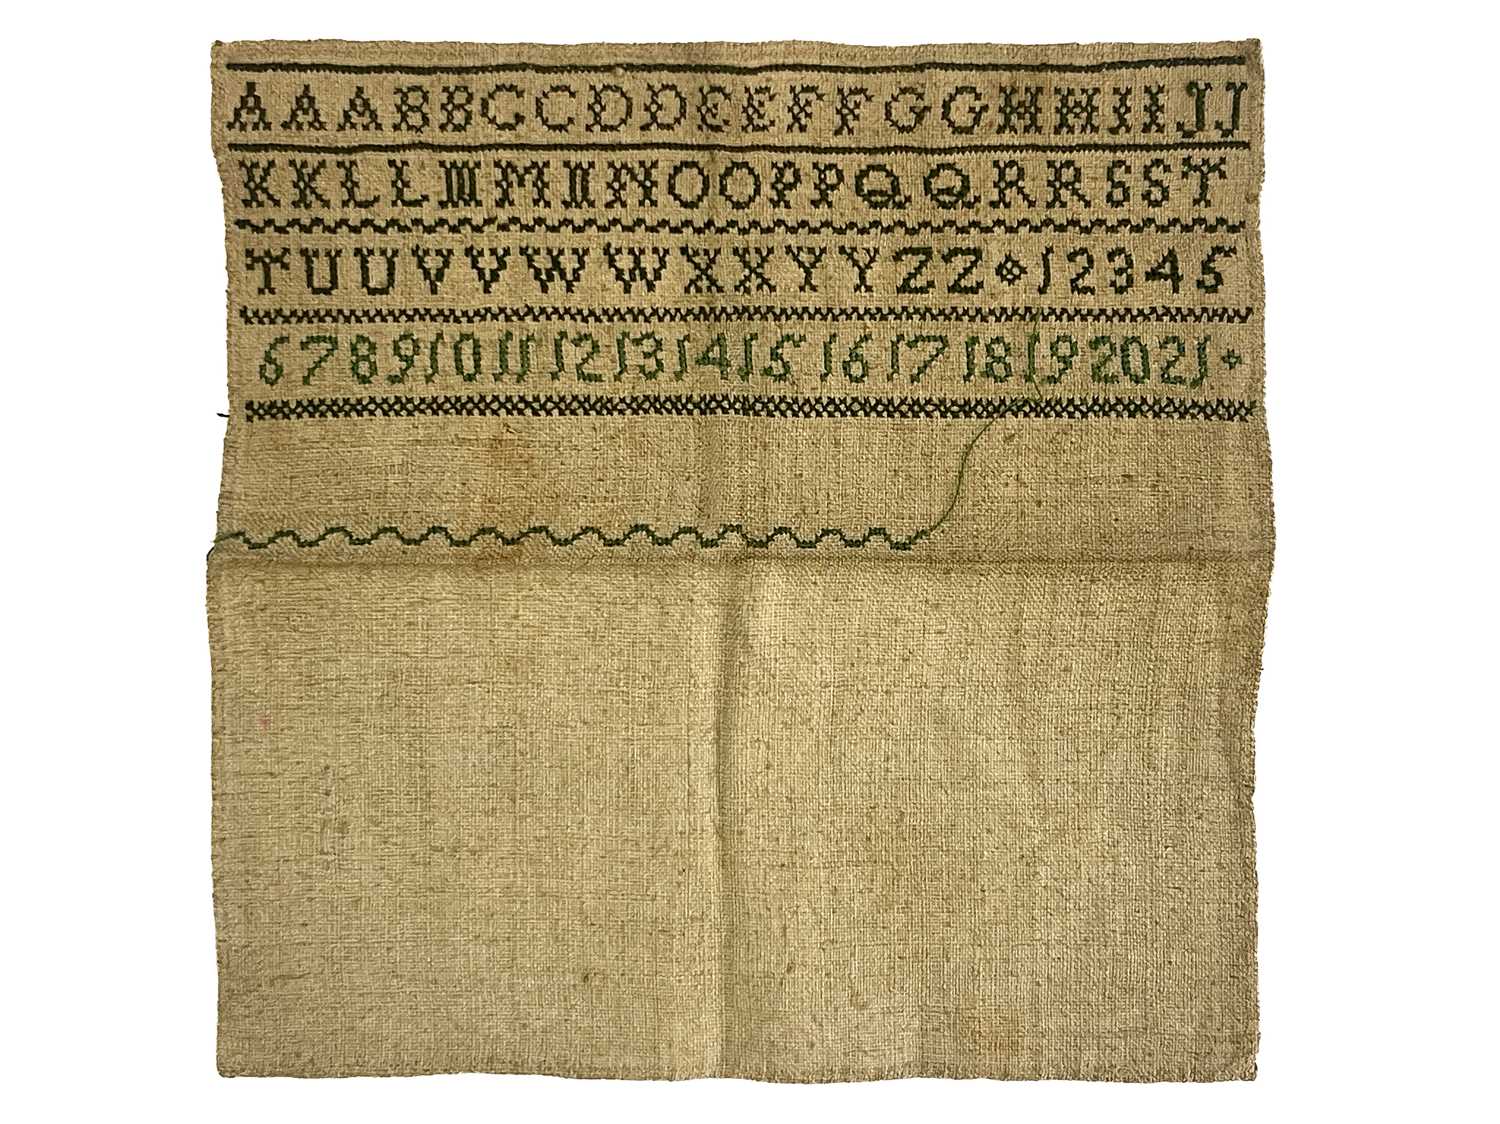 An 18th century sampler, embroidered in green with alphabet and numbers in four rows, 17cm square,